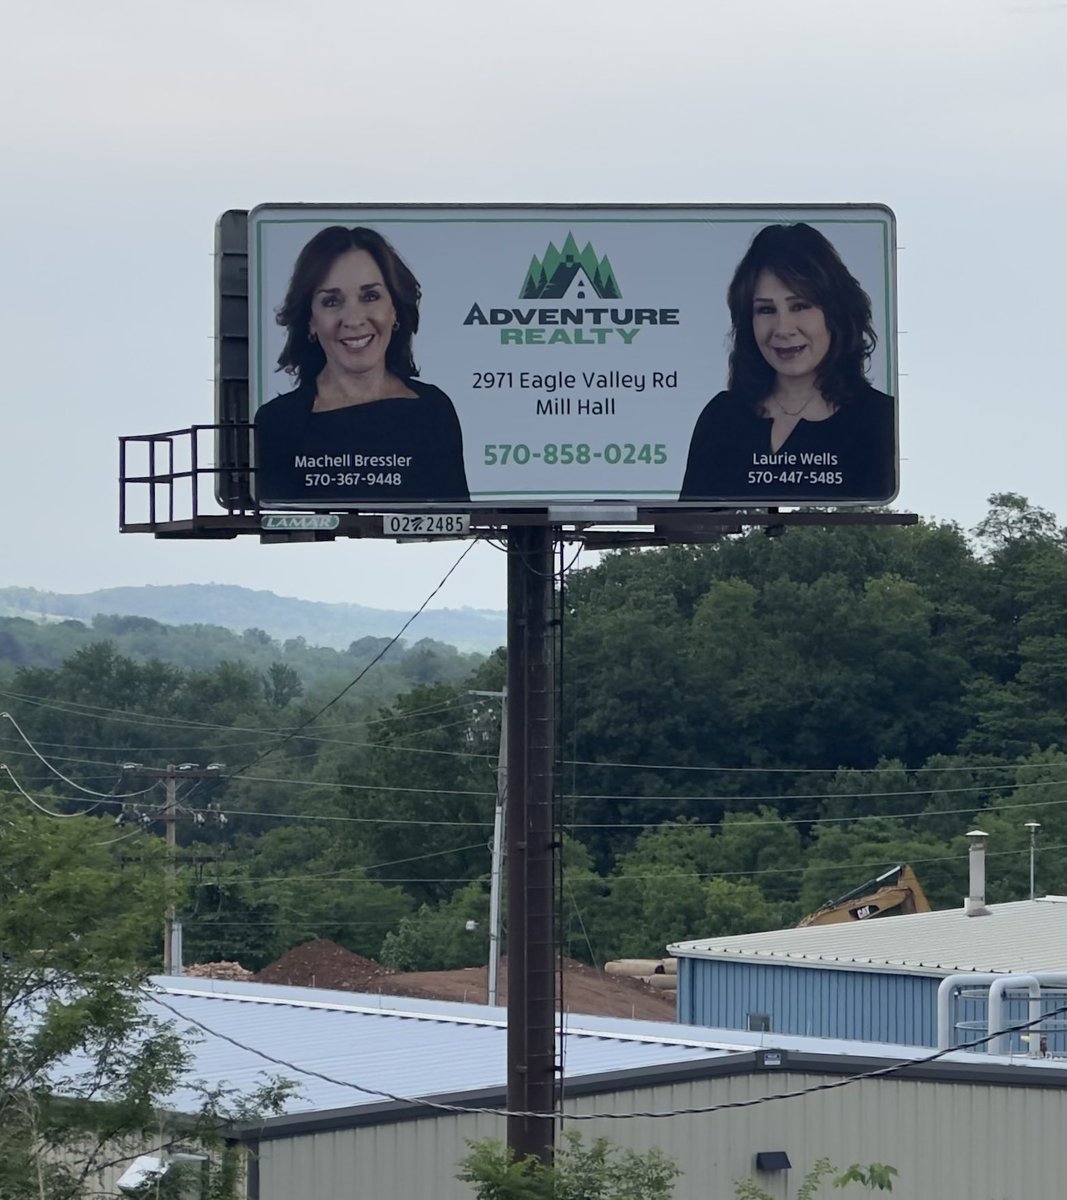 Look out for us on US-220! 😎

#realestate #adventurerealty #adventure #local #startyouradventure #realestateagent #pennsylvania